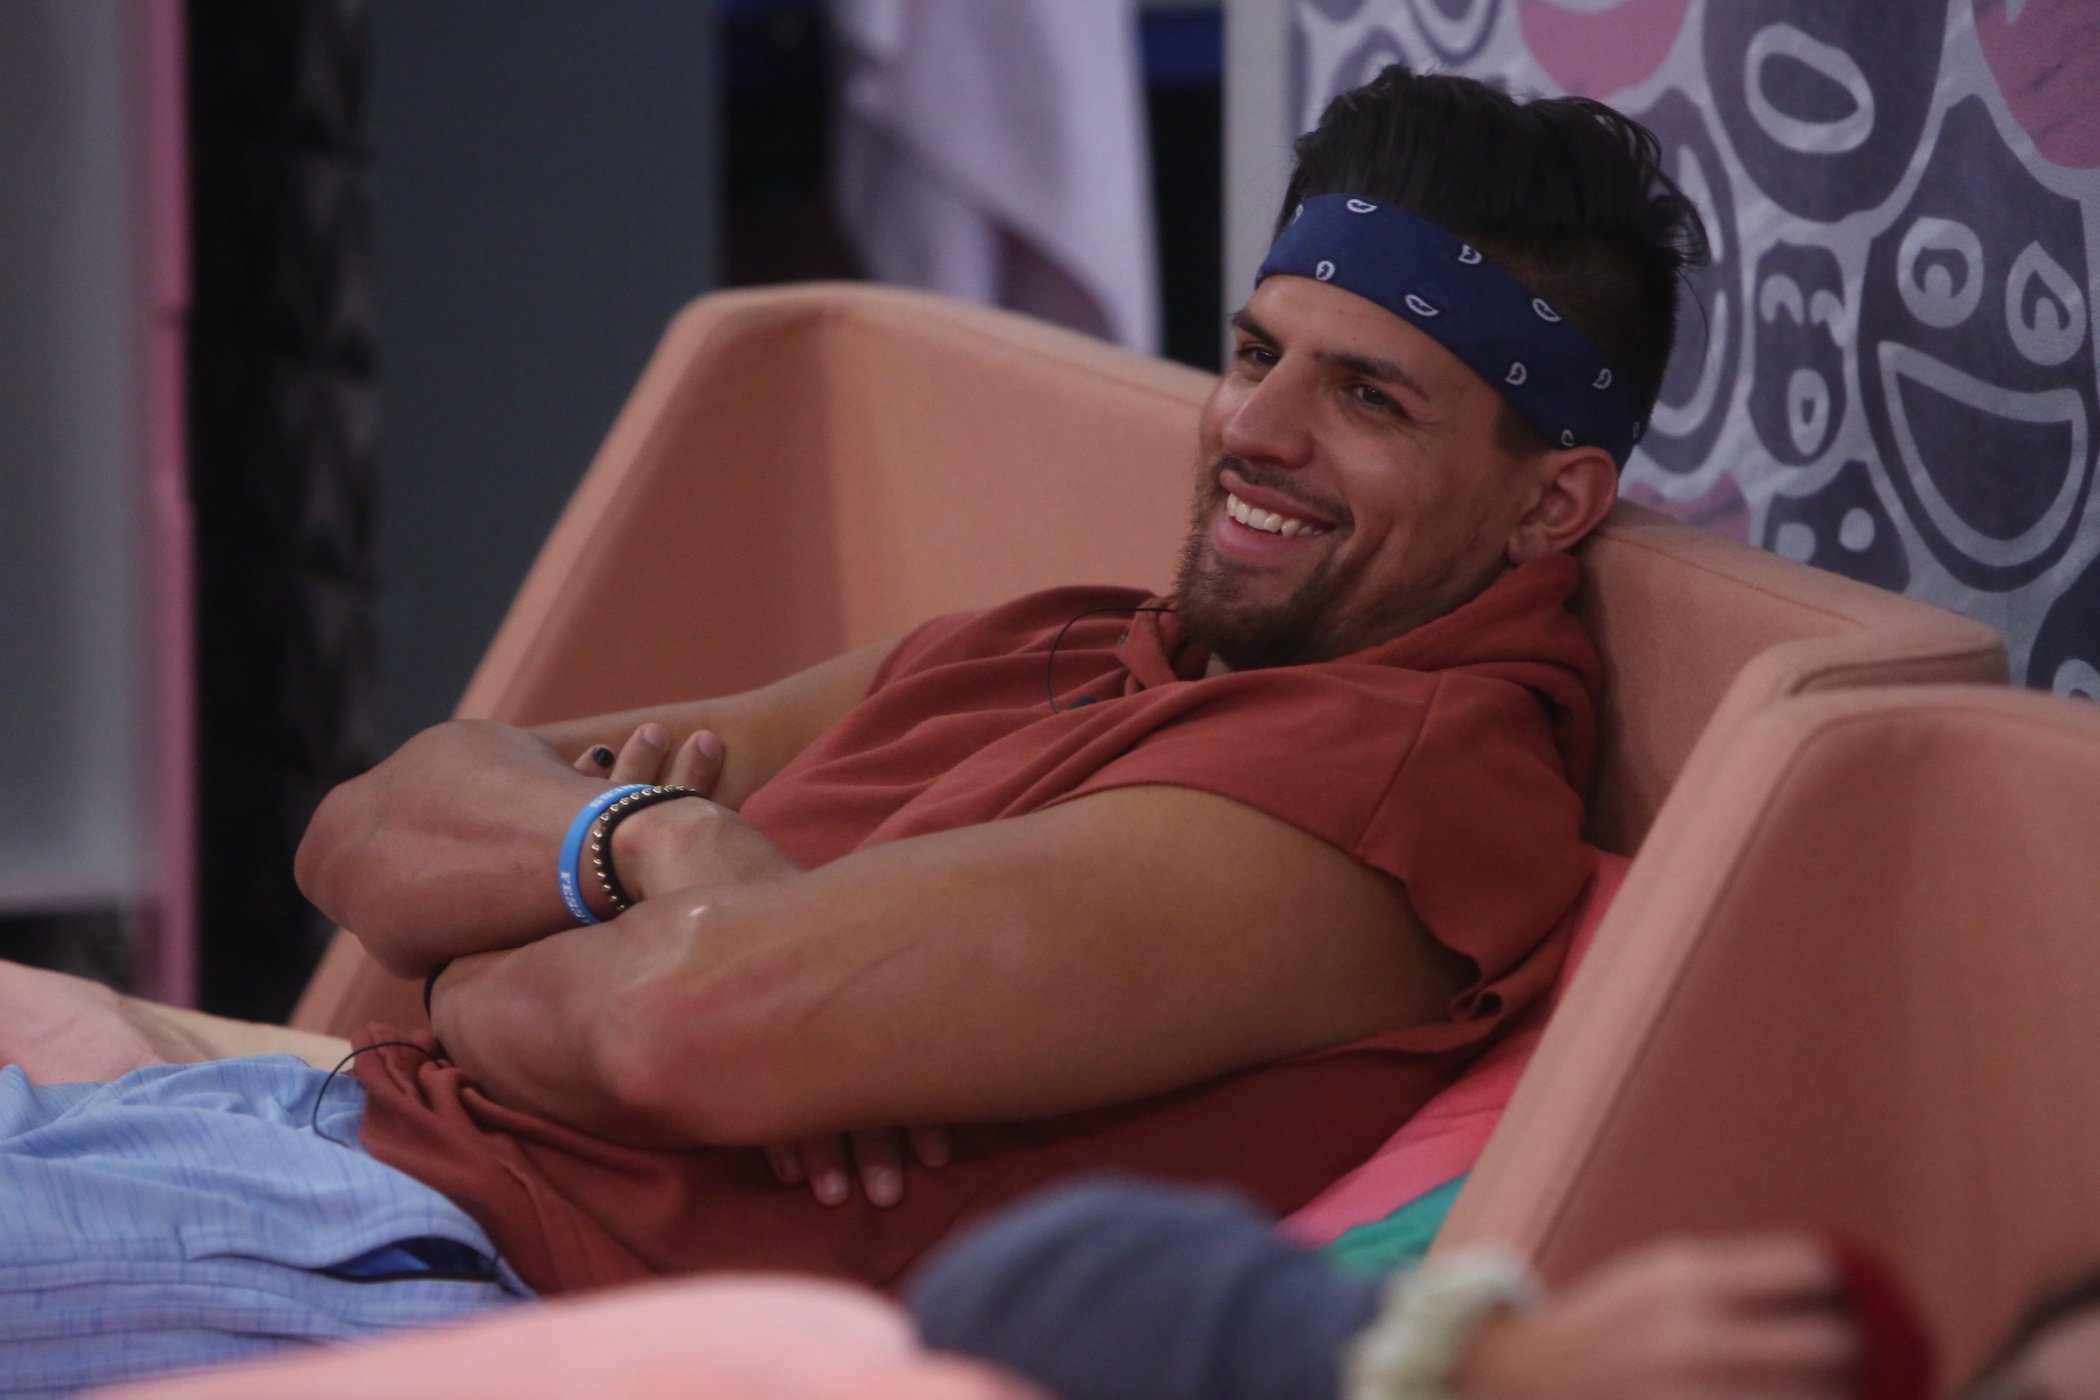 Fessy Shafaat, part of MTV's 'The Challenge' Season 37 cast, laughing while sitting on a couch in the 'Big Brother' house